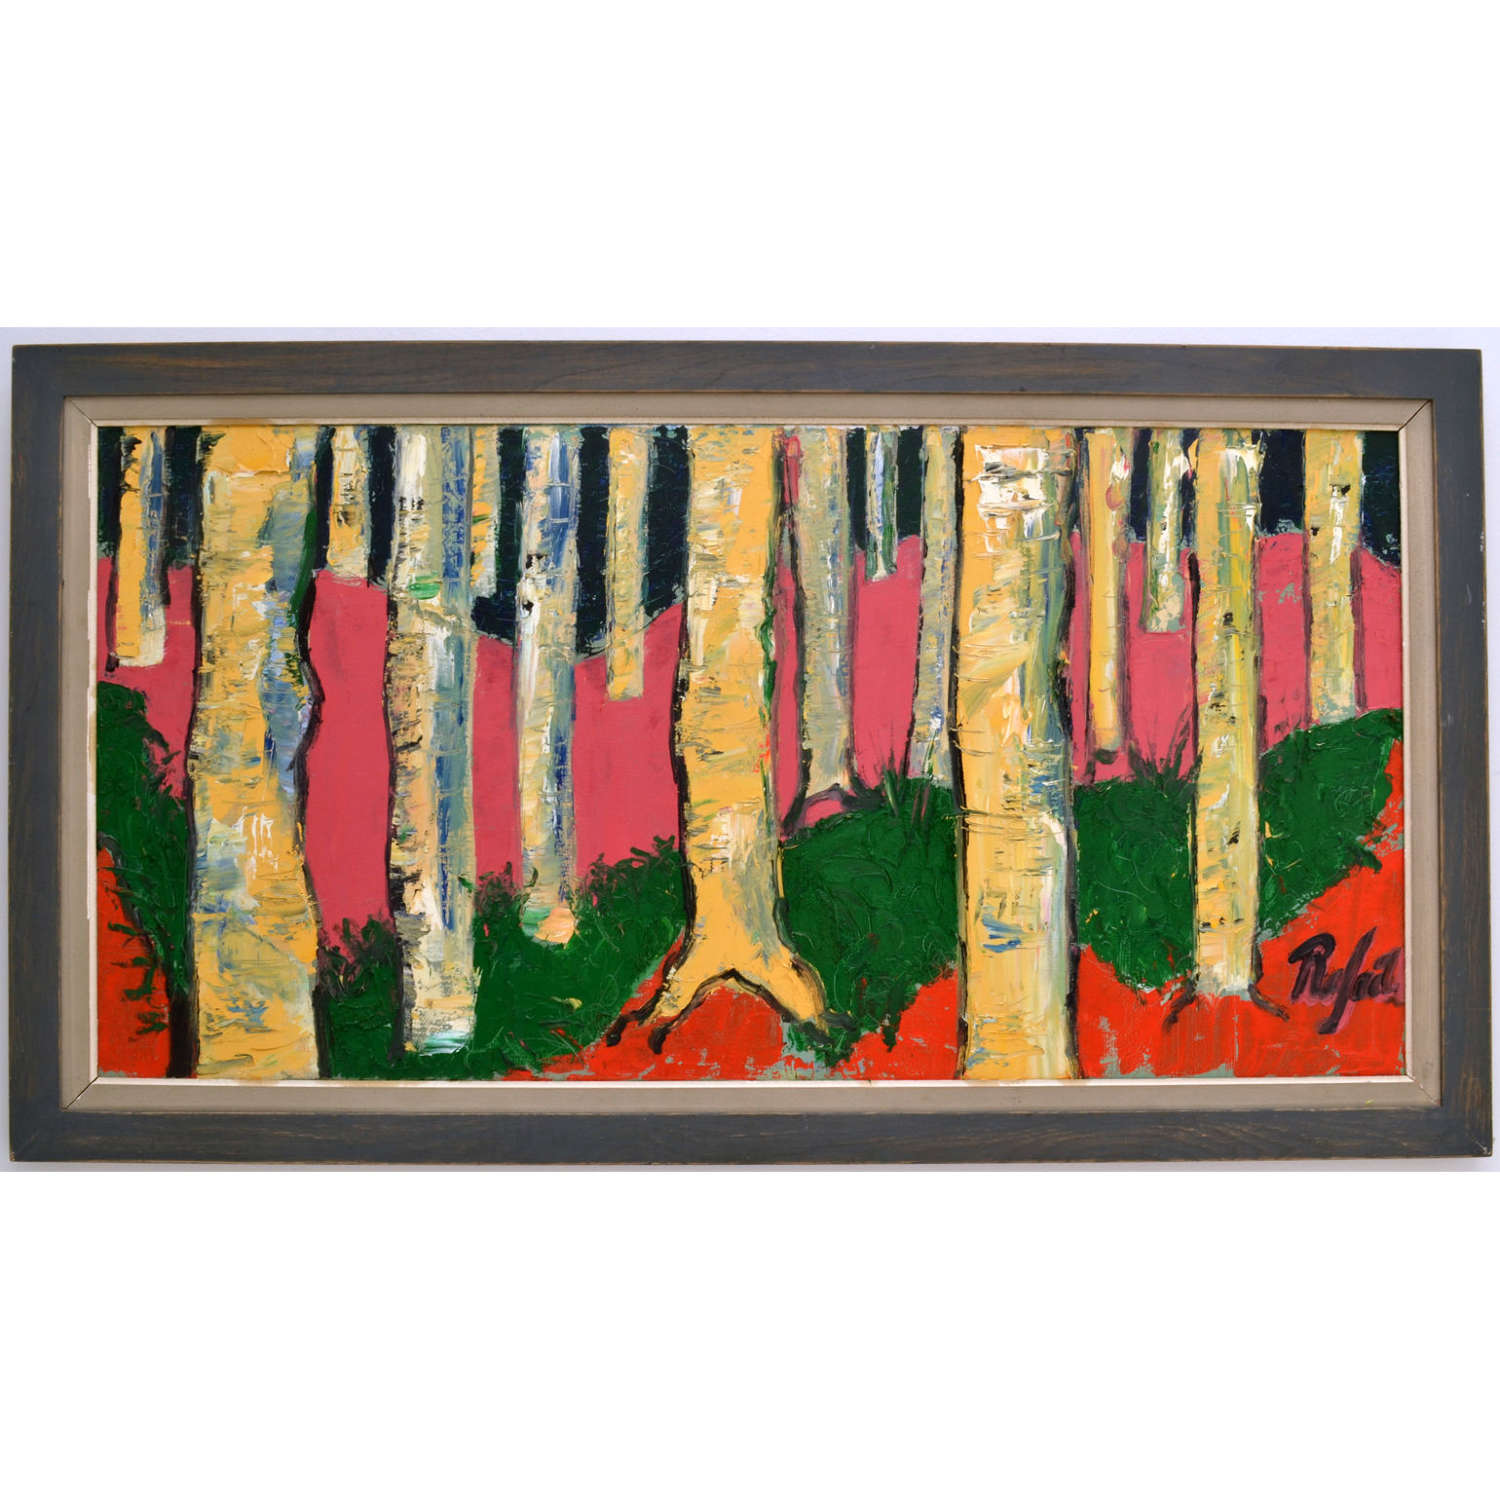 Large Expressive Birch Tree Landscape Painting by Rafael